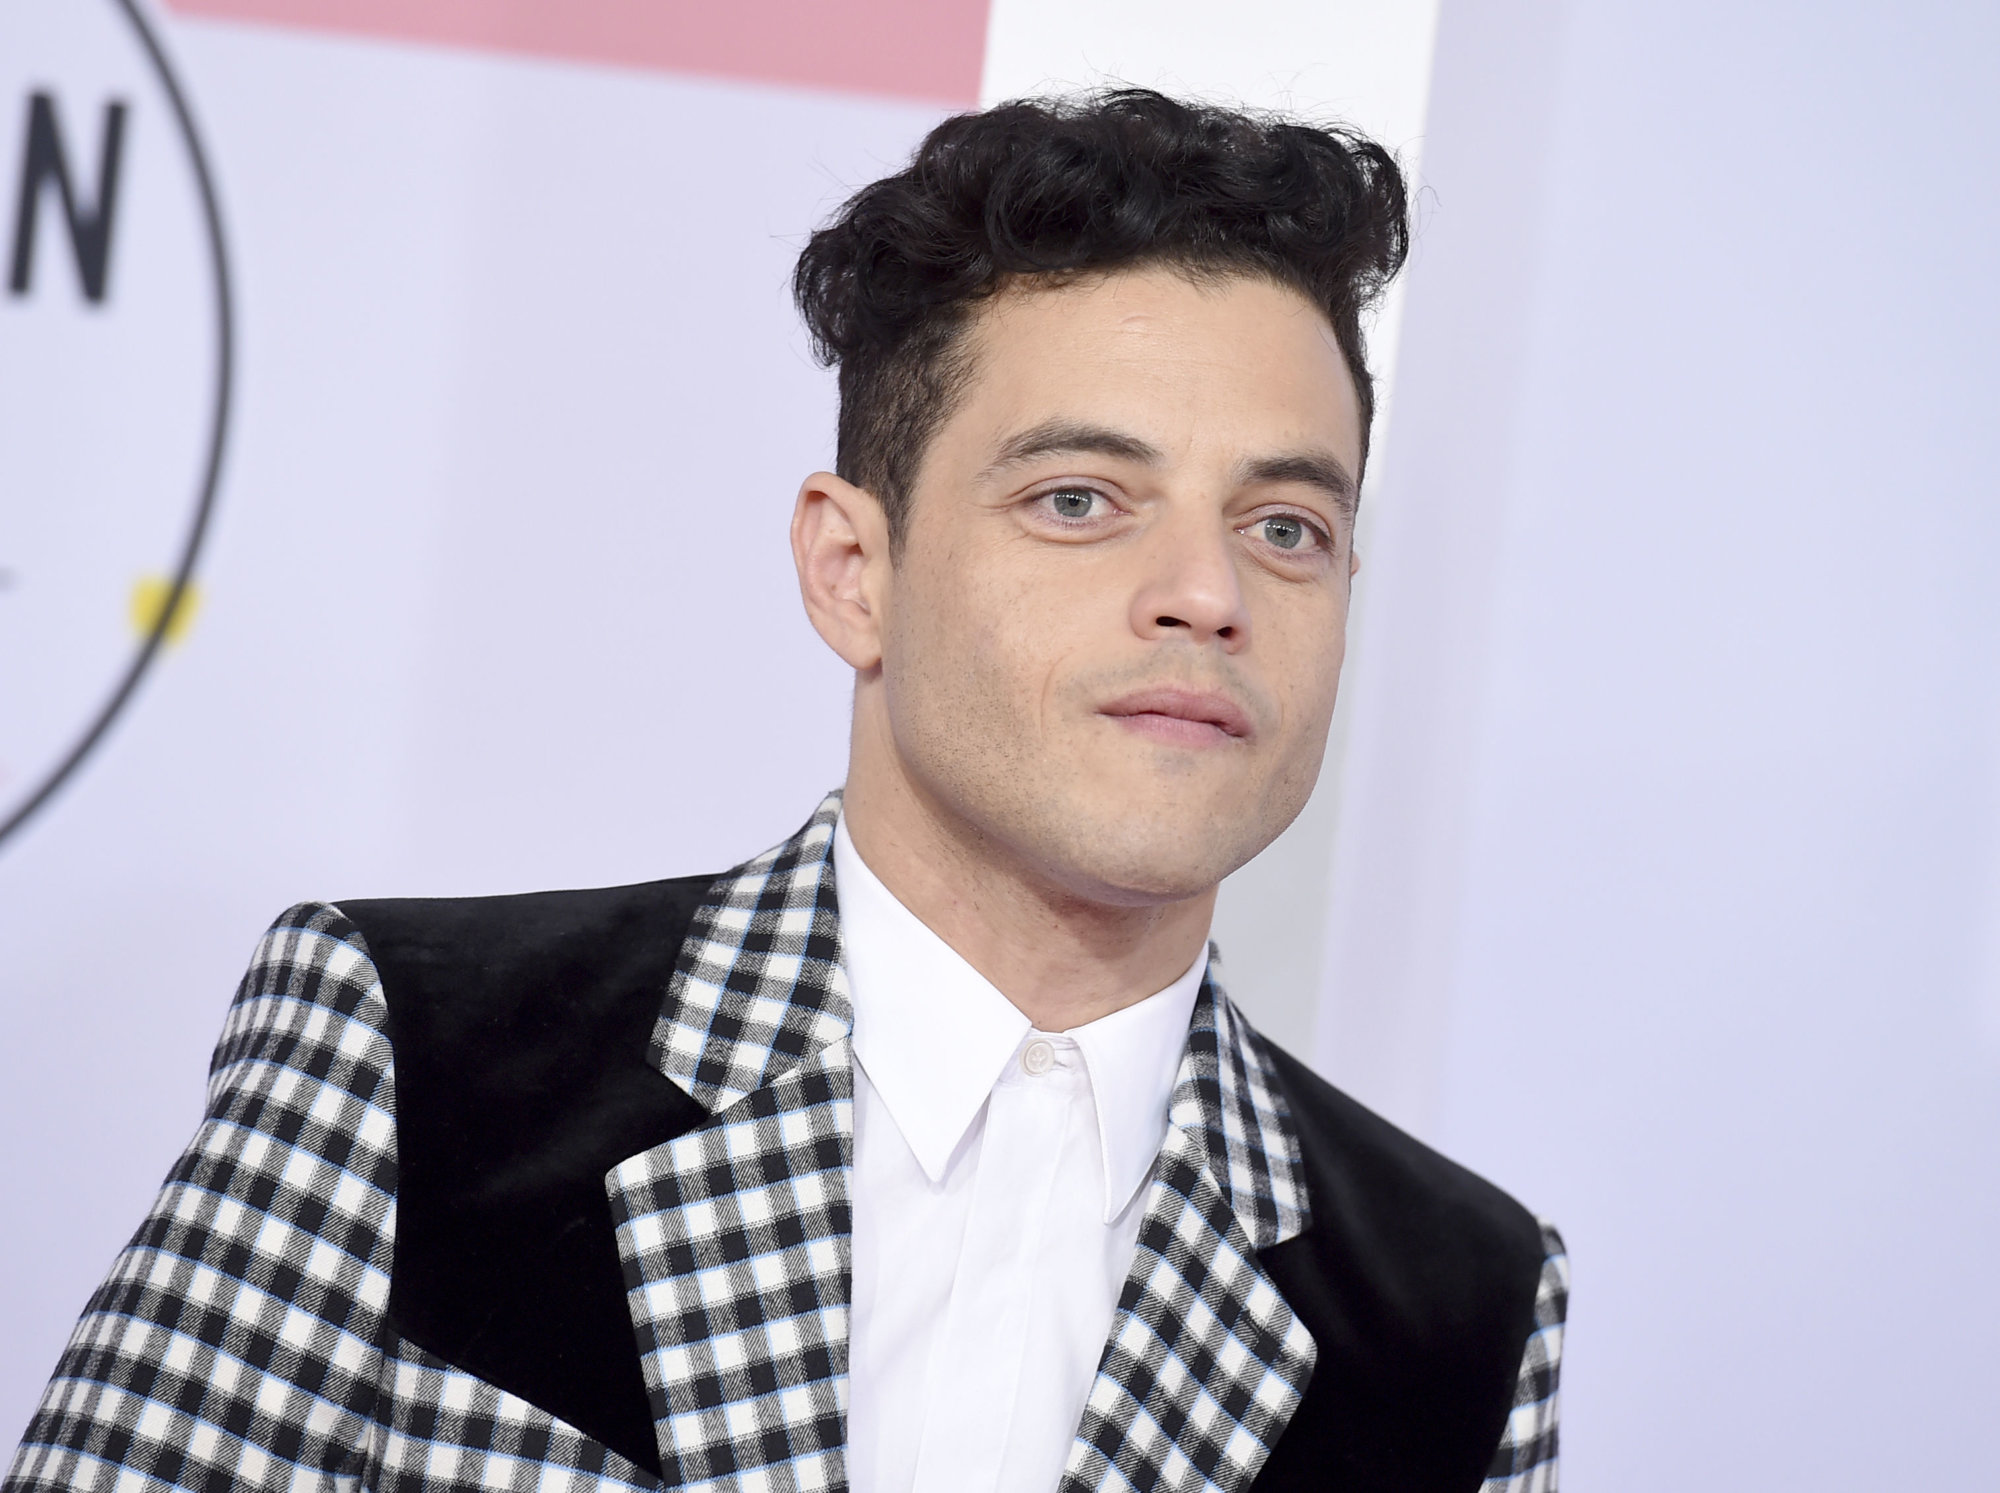 Rami Malek arrives at the American Music Awards on Tuesday, Oct. 9, 2018, at the Microsoft Theater in Los Angeles. (Photo by Jordan Strauss/Invision/AP)